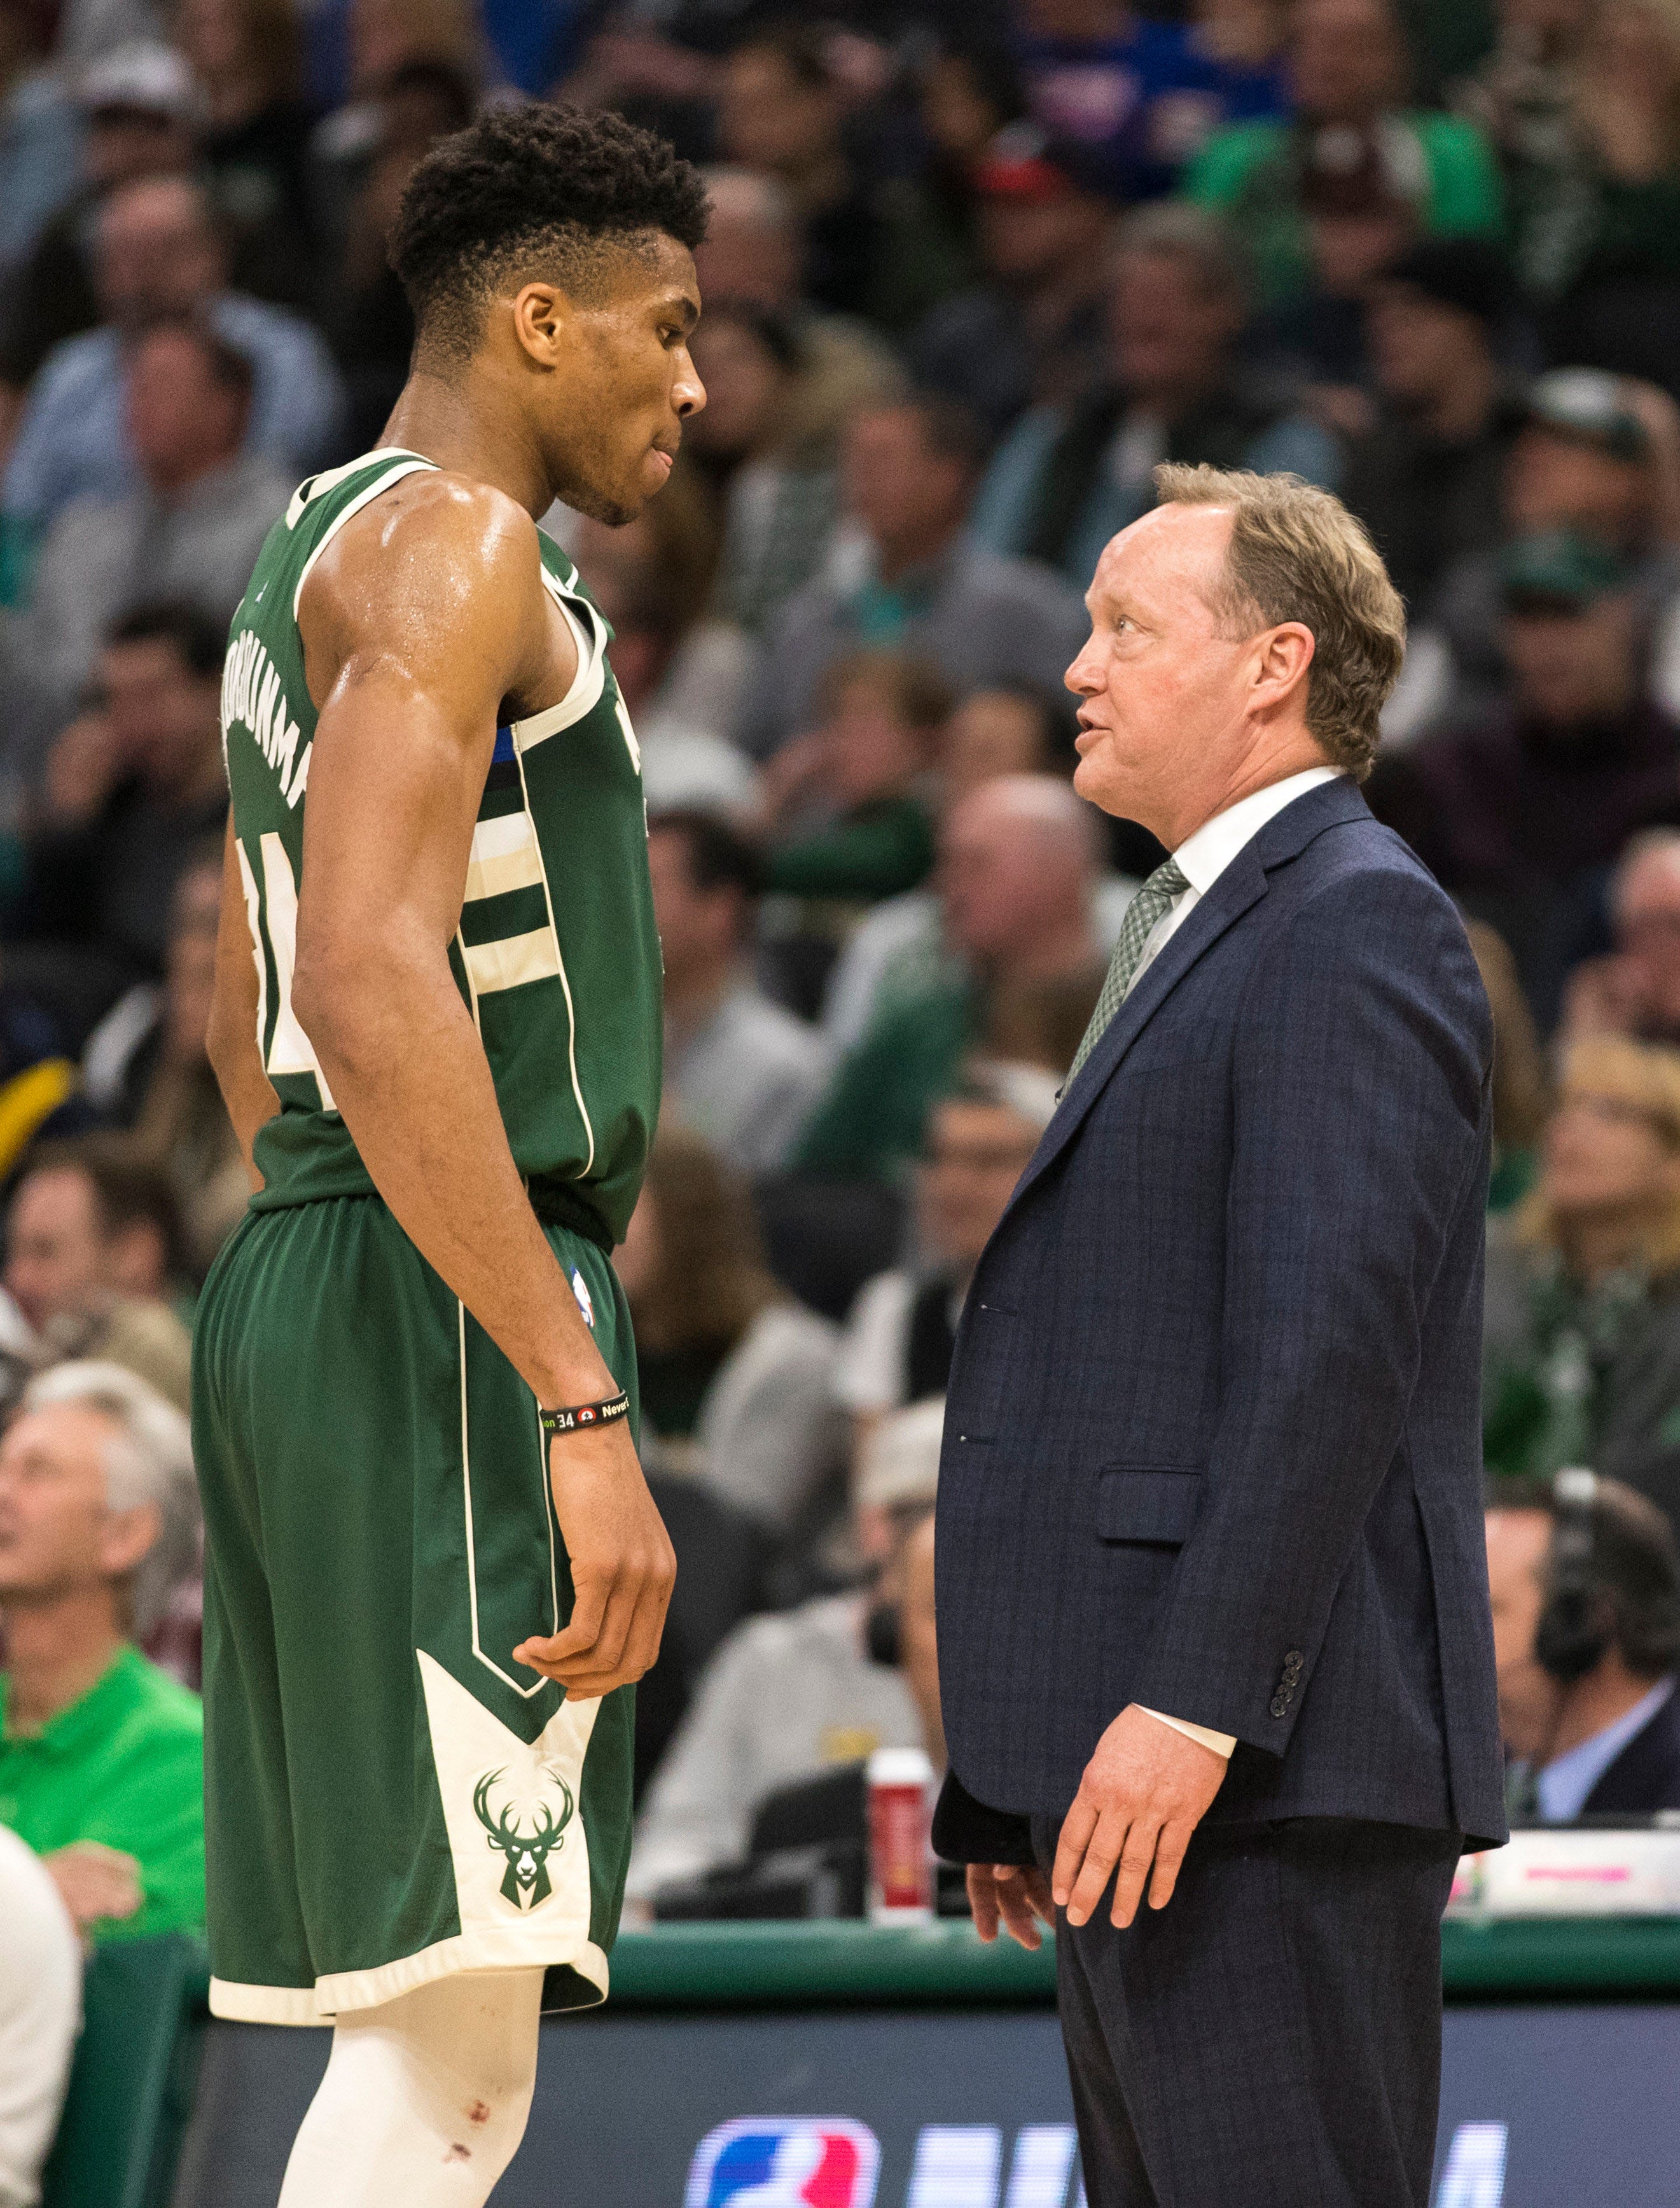 The Bucks' Giannis Antetokounmpo won NBA MVP last year and Mike Budenholzer was voted coach of the year. Both are up for the awards again this season.